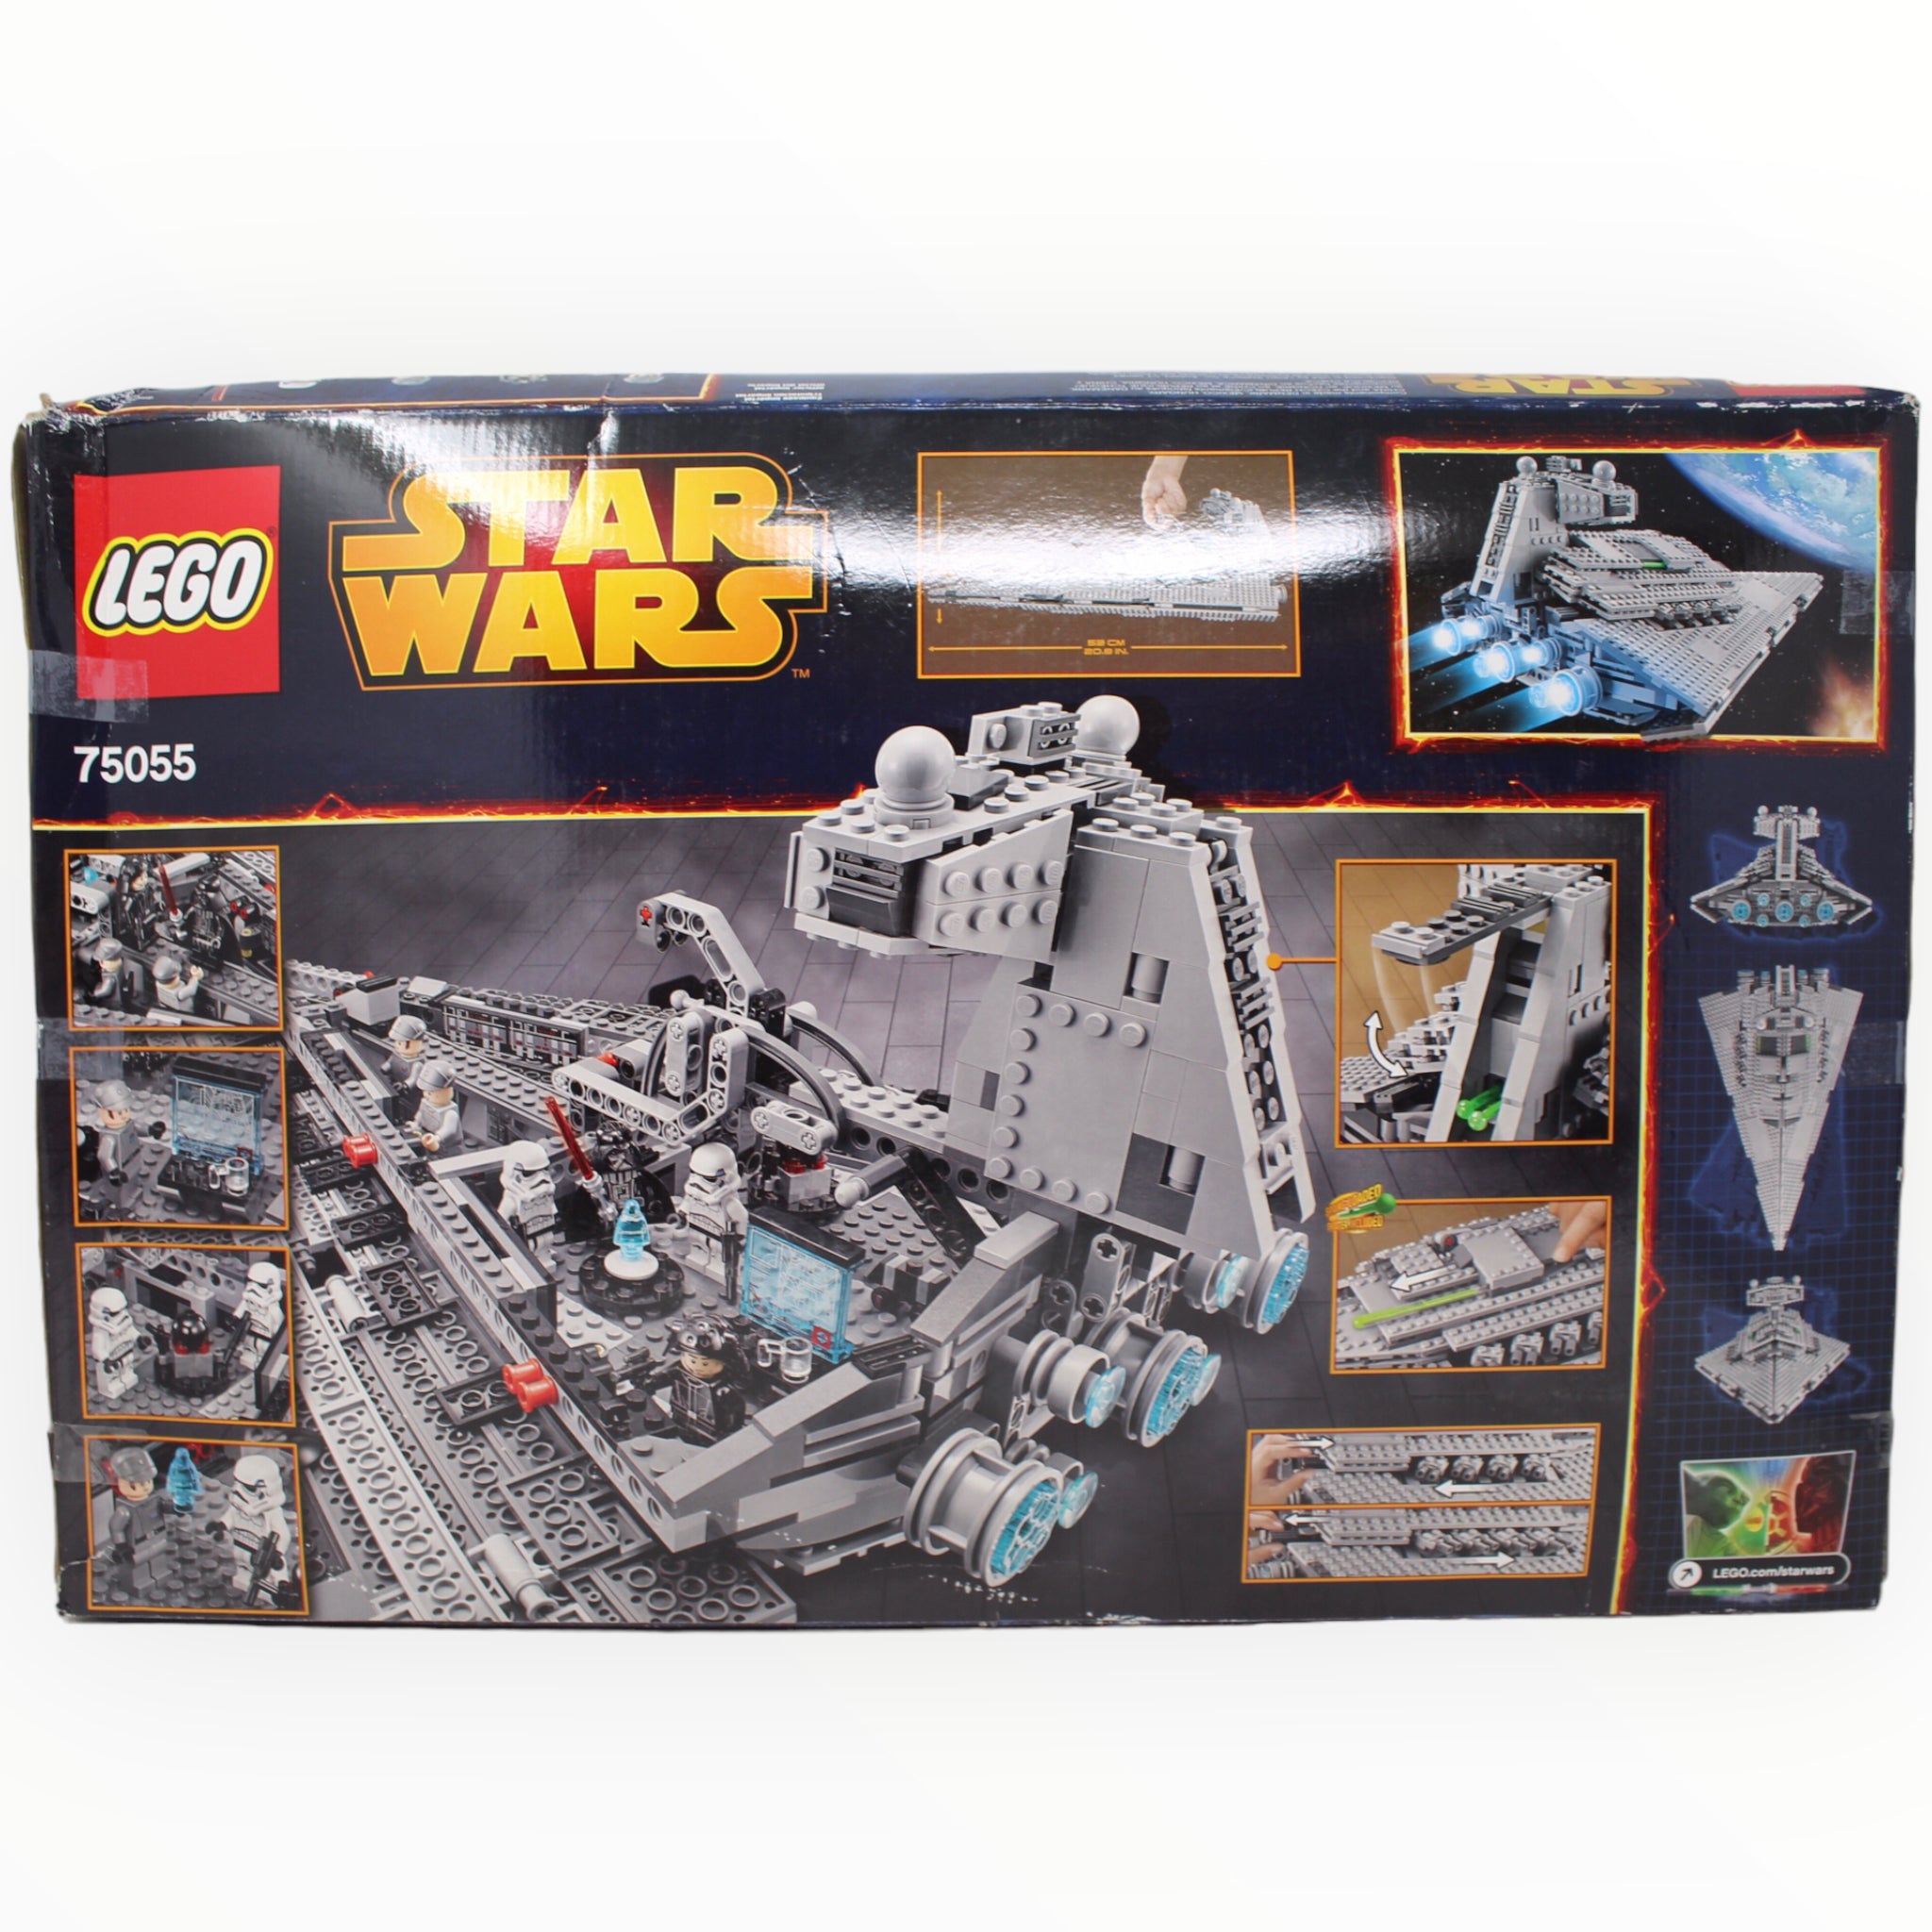 Certified Used Set 75055 Star Wars Imperial Star Destroyer (open and damaged box, sealed bags)